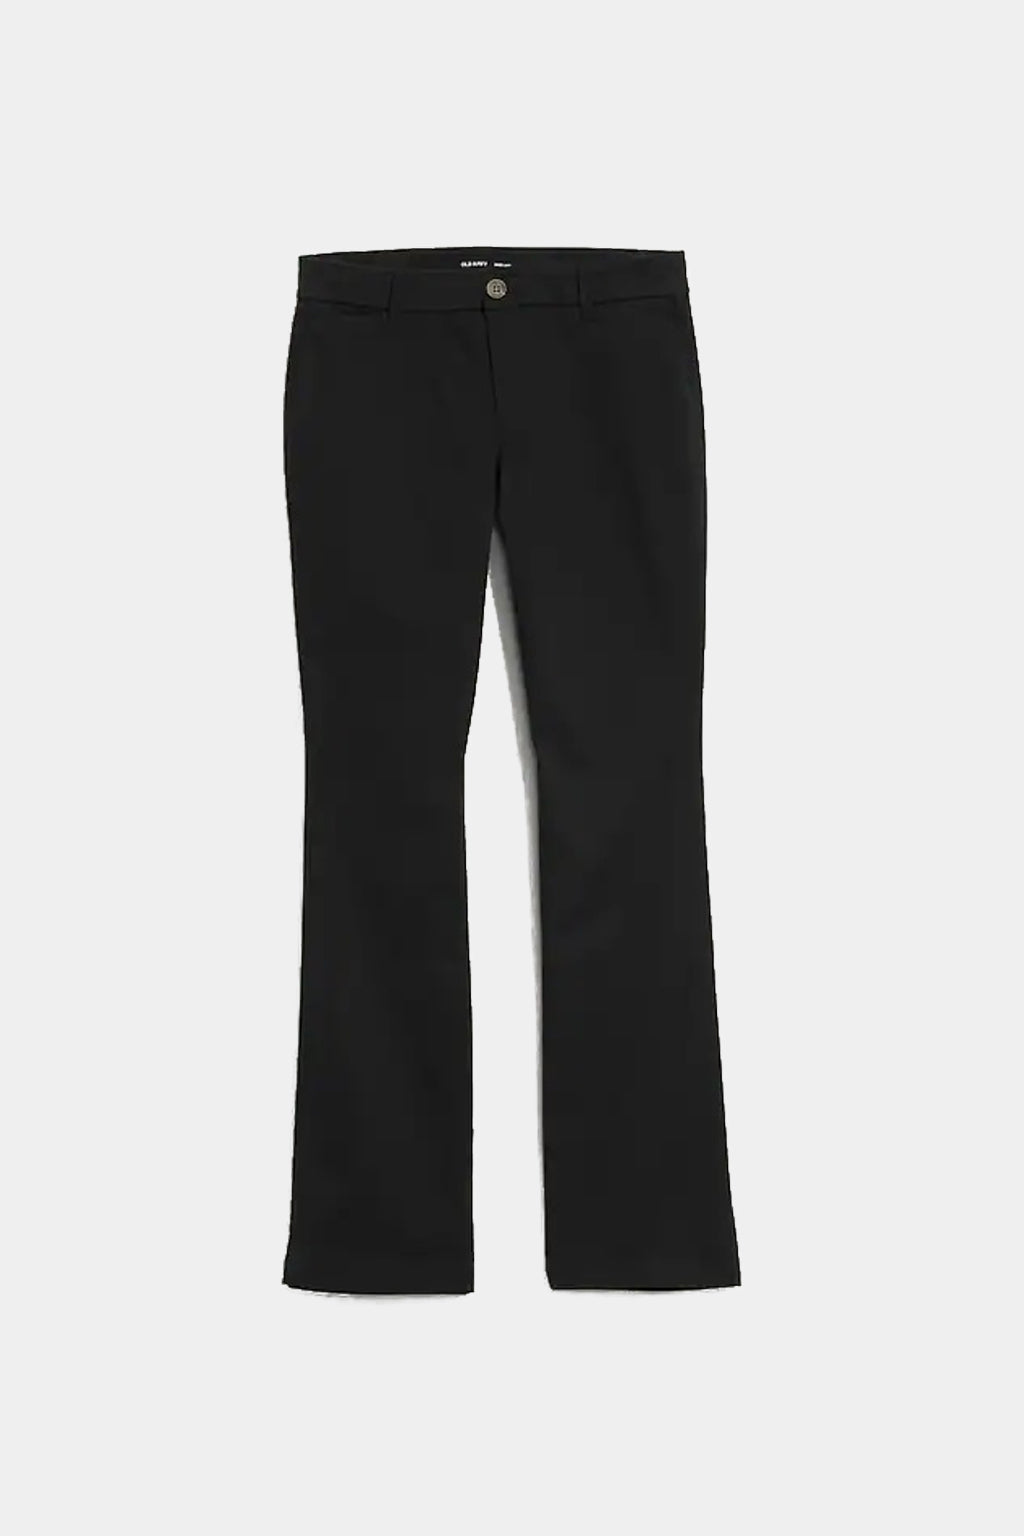 Old Navy - Mid-Rise Boot Cut Pant